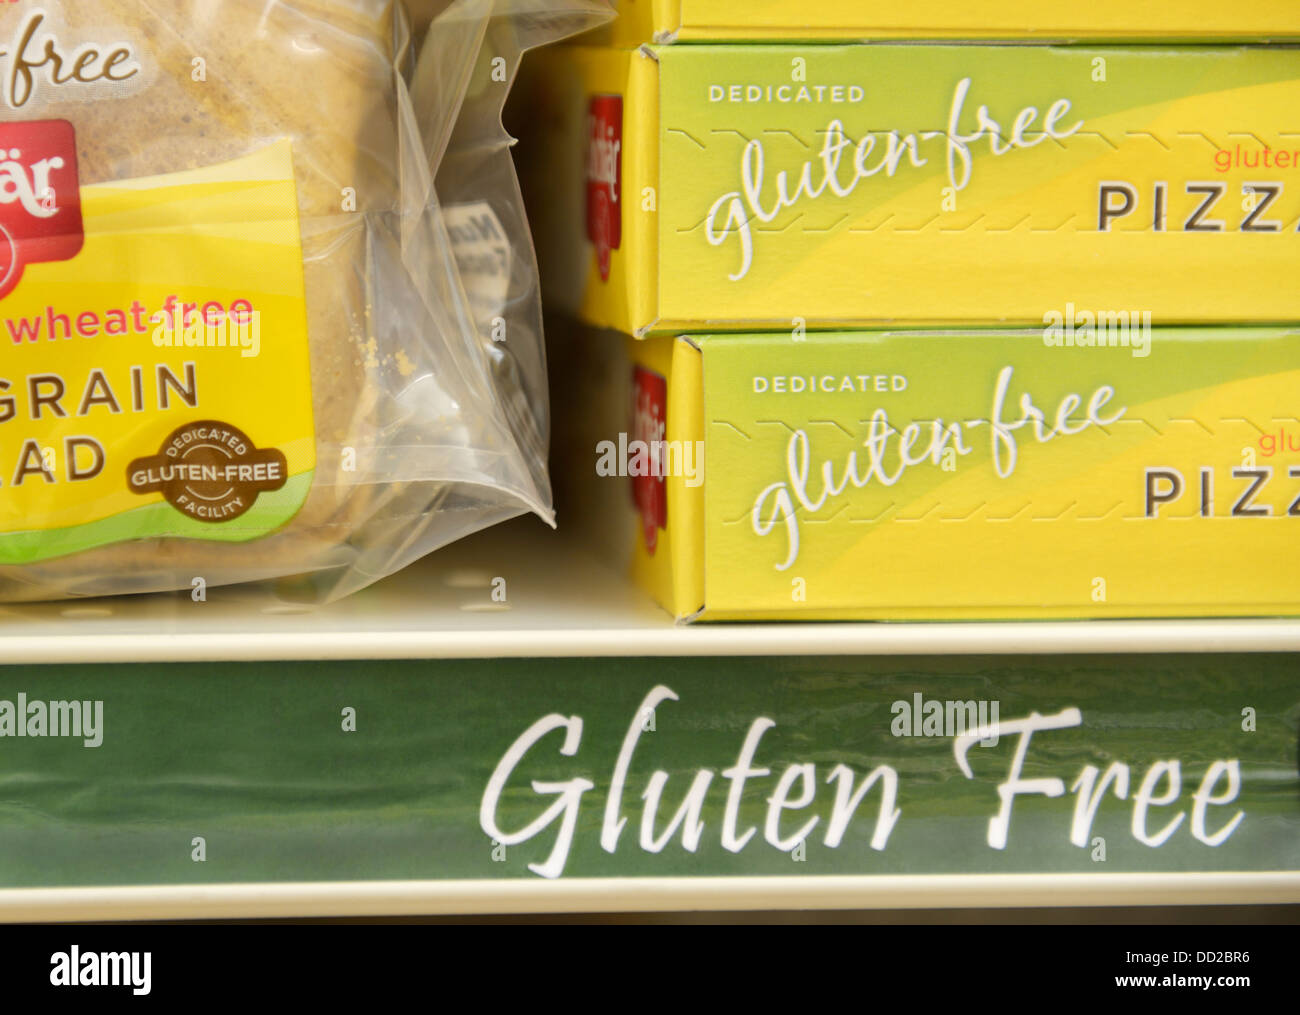 Gluten free food items on a shelf in the gluten free section of a supermarket Stock Photo